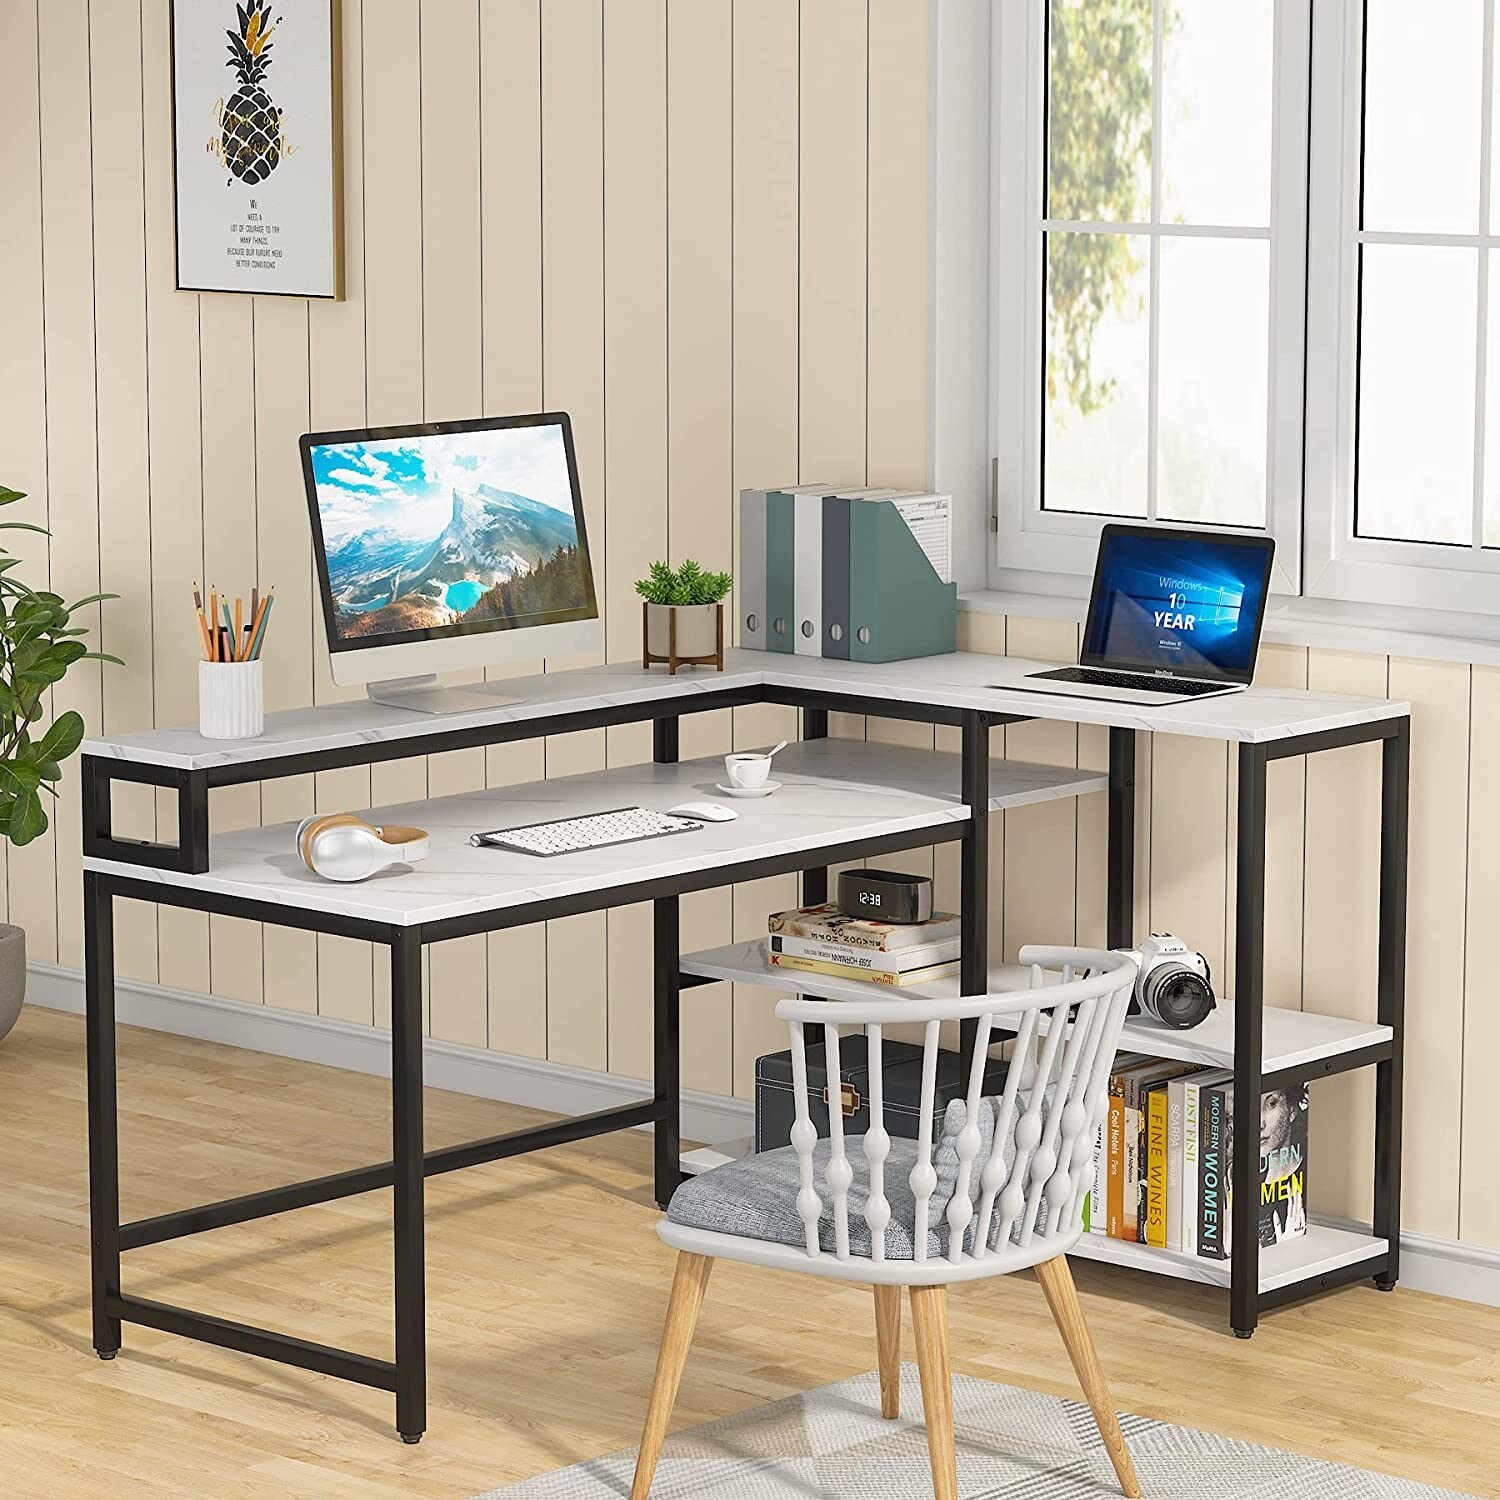 https://ak1.ostkcdn.com/images/products/is/images/direct/70ee47635e1f55b89831f2015c516943cc06a1cd/55-Inch-Reversible-L-Shaped-Desk-with-Storage-Shelf%2C-Corner-Desk-for-Home-Office.jpg